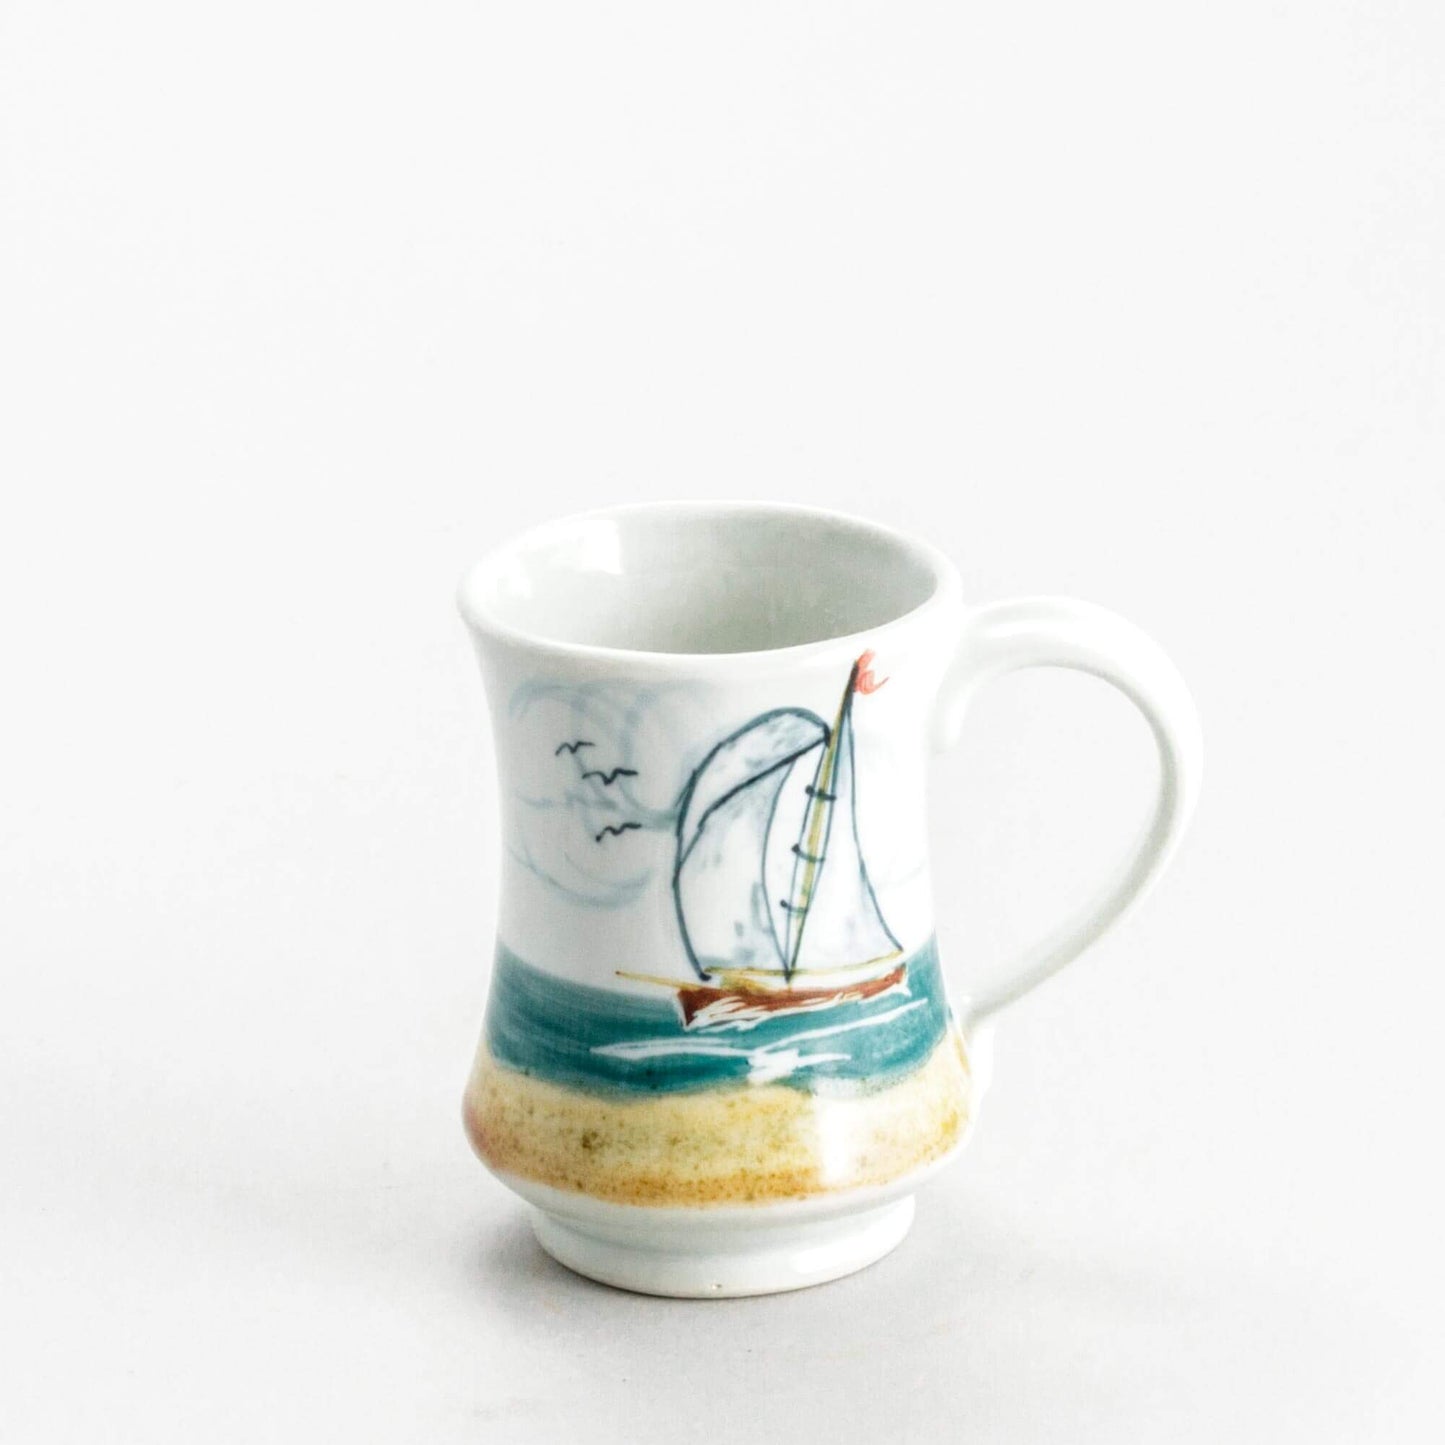 Handmade Pottery Pedestal Mug made by Georgetown Pottery in Maine Sailboat